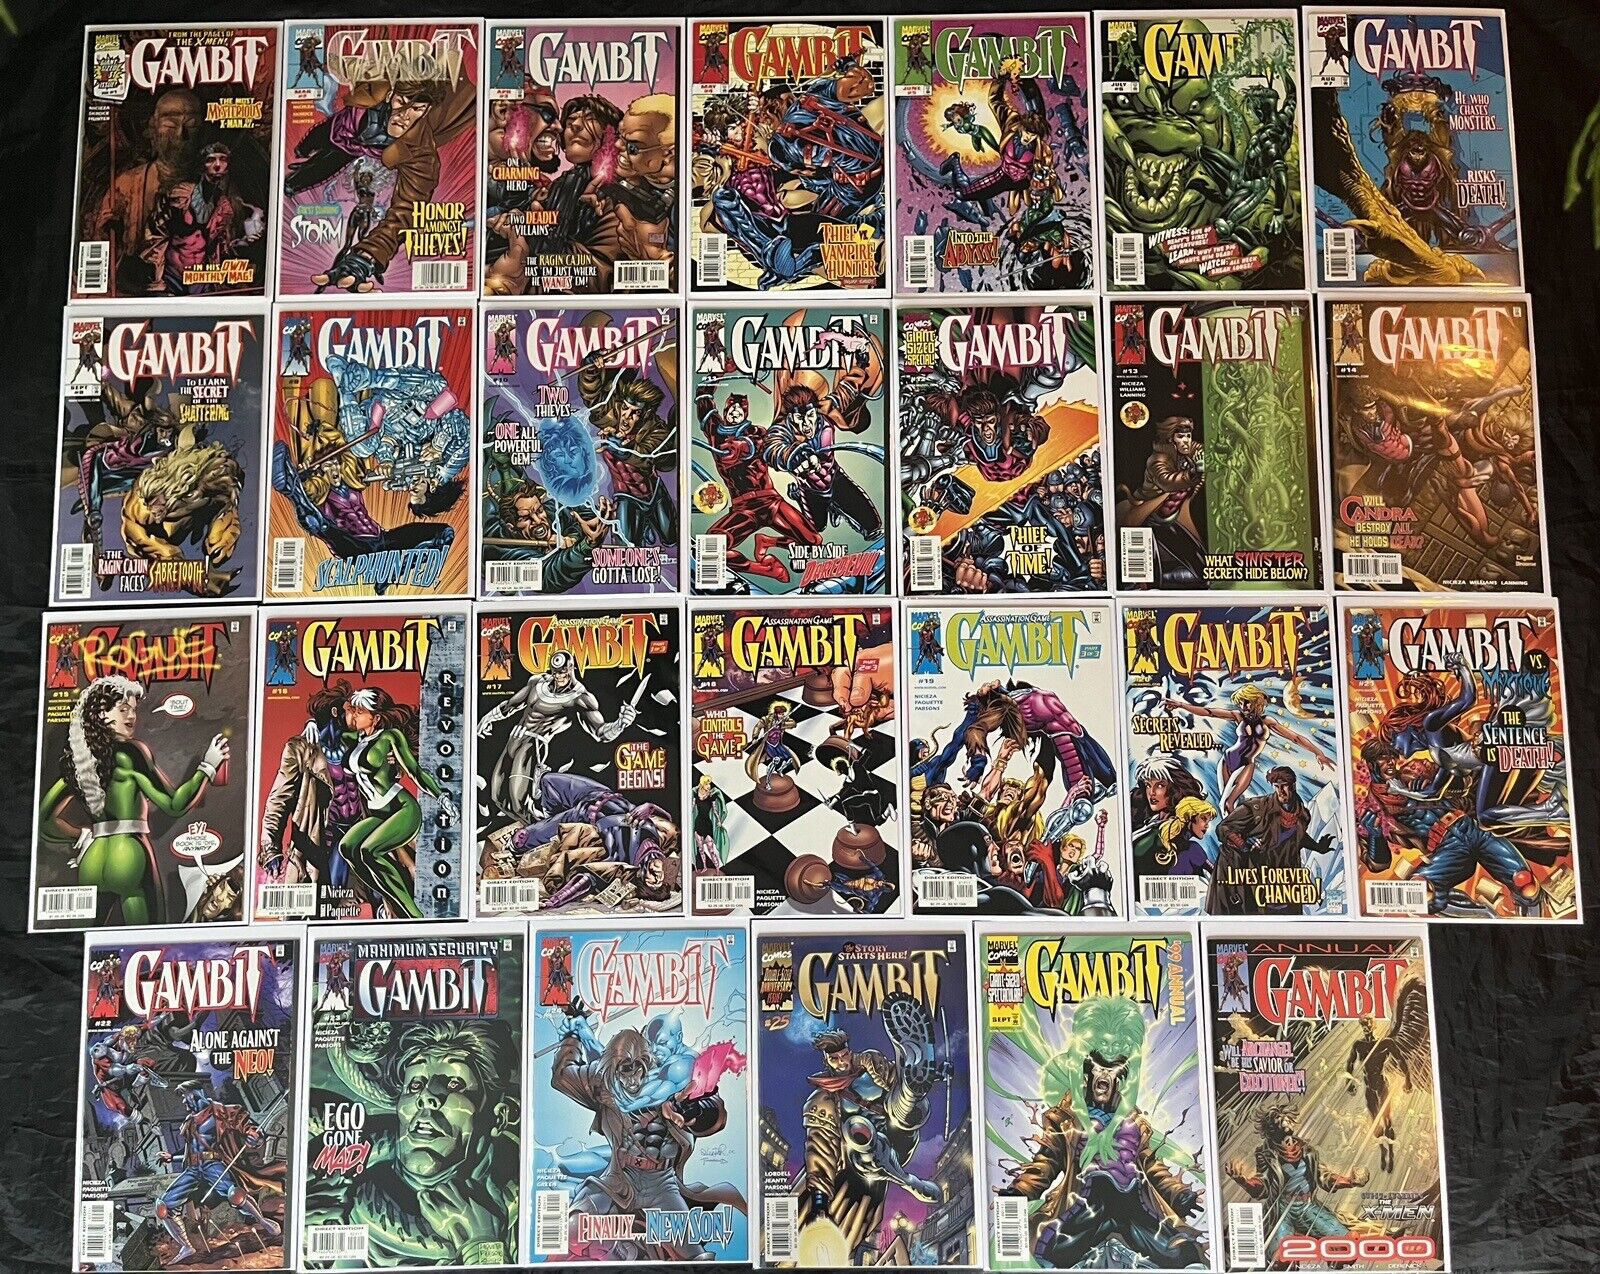 Gambit #1-4 (1997) + #1-25 + Annuals #1-2 (1999) Full Sets VF/NM (9.0) Condition